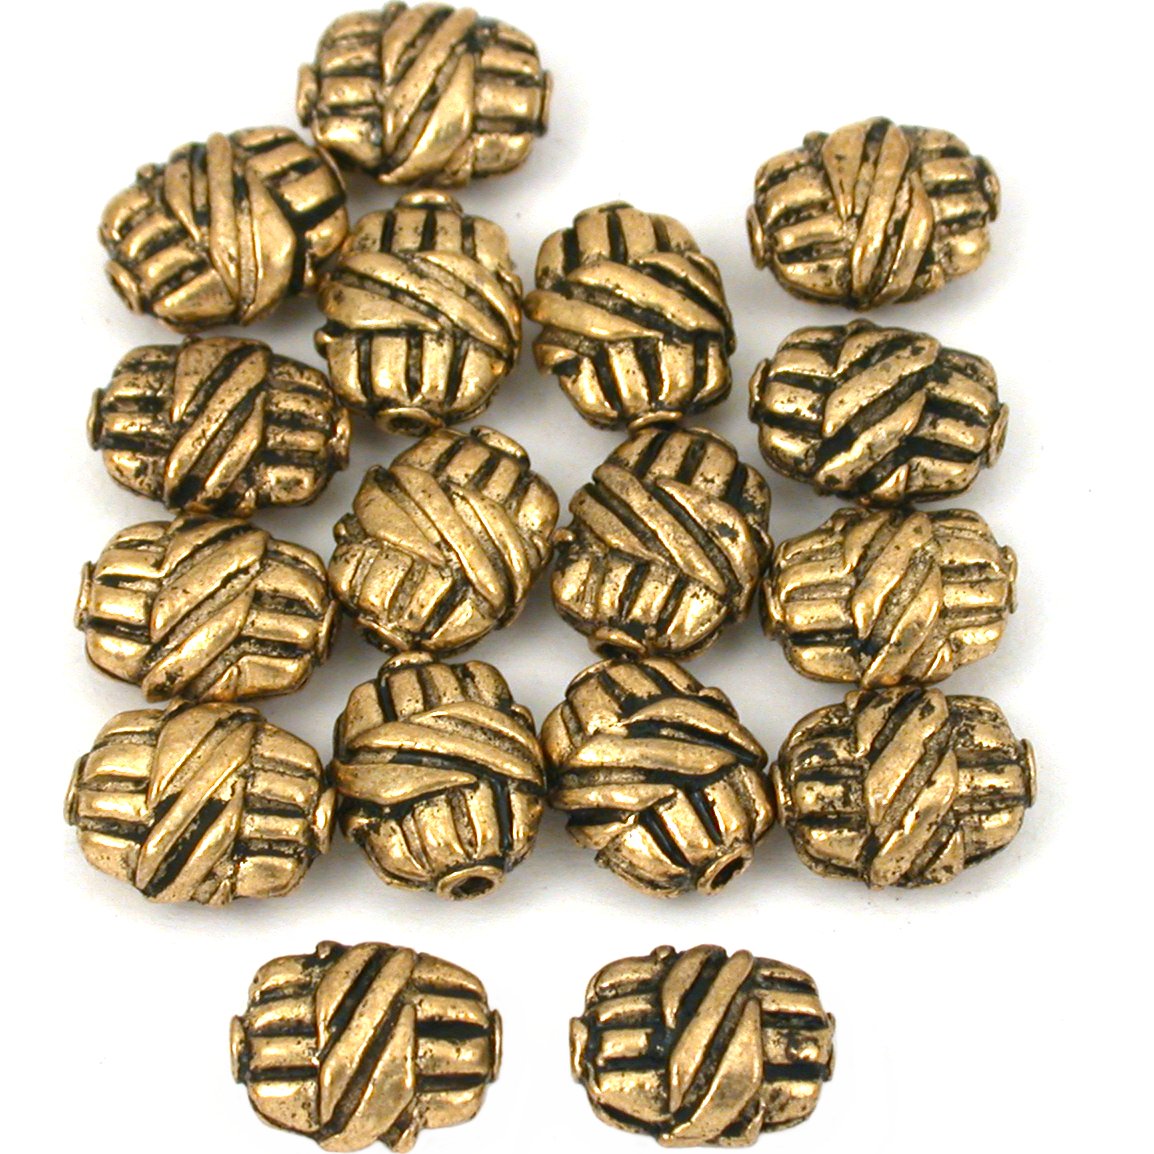 Bali Barrel Flat Oval Antique Gold Plated Beads 9mm 15 Grams 15Pcs Approx.